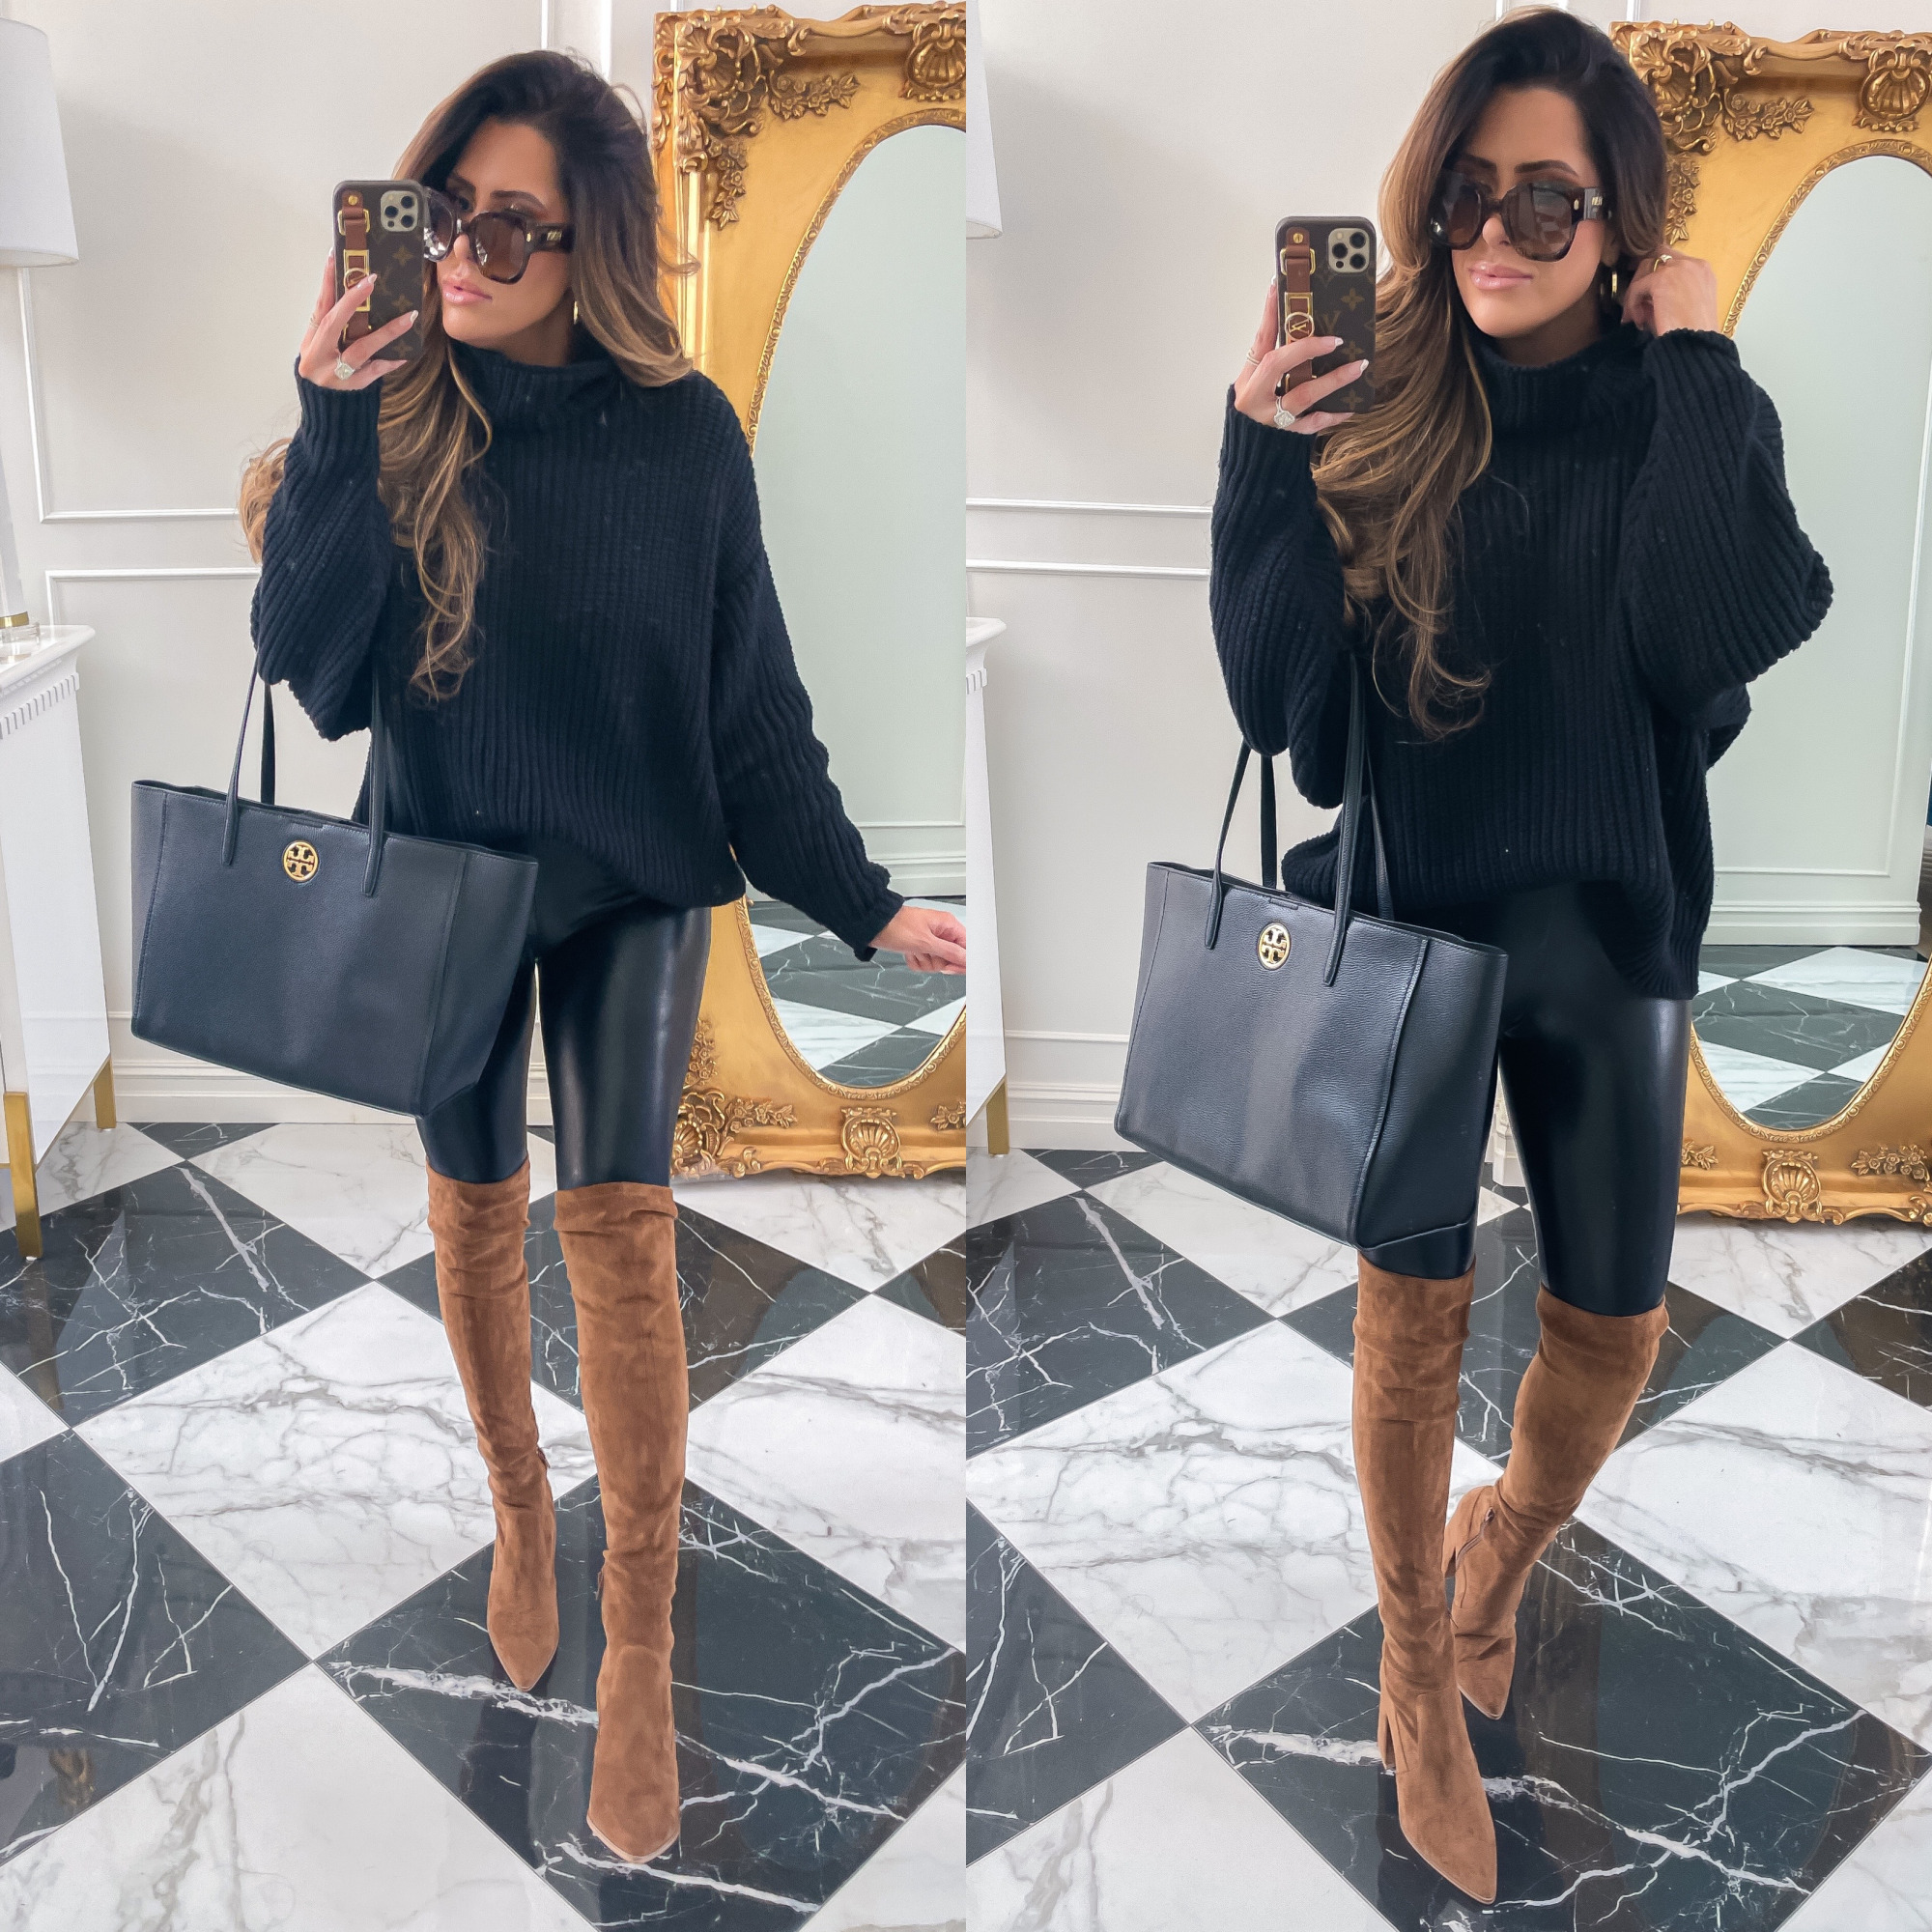 NSALE 2021 picks best of sale emily ann gemma | Nordstrom Anniversary Sale by popular US fashion blog, The Sweetest Thing: image of Emily Gemma wearing a black knit mock neck sweater, black faux leather leggings, brown suede over the knee boots, and holding a black Tory Burch tote bag. 